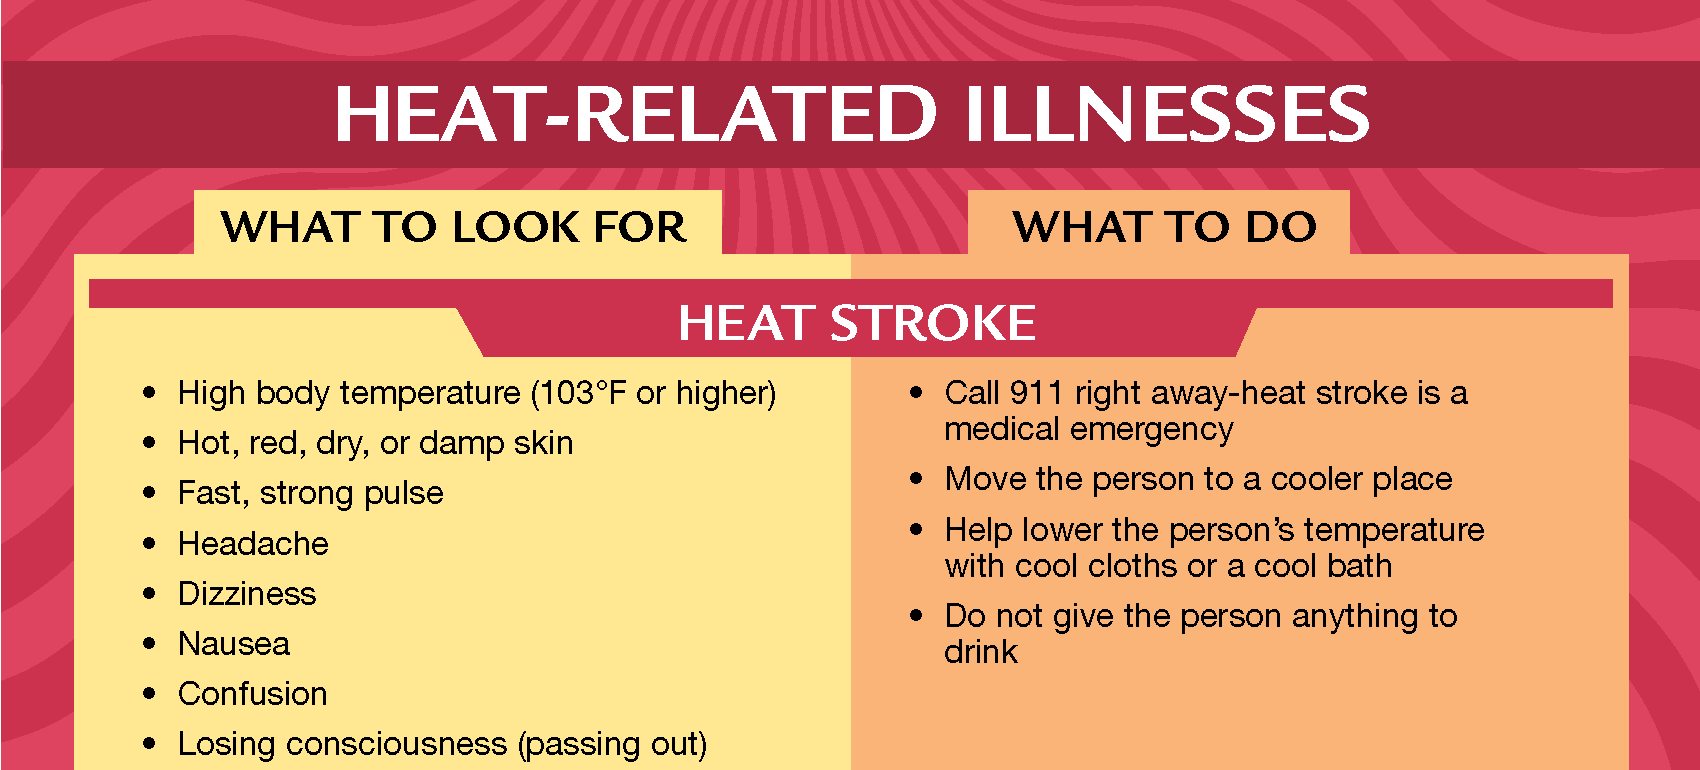 Heat Related Illness - What to Do